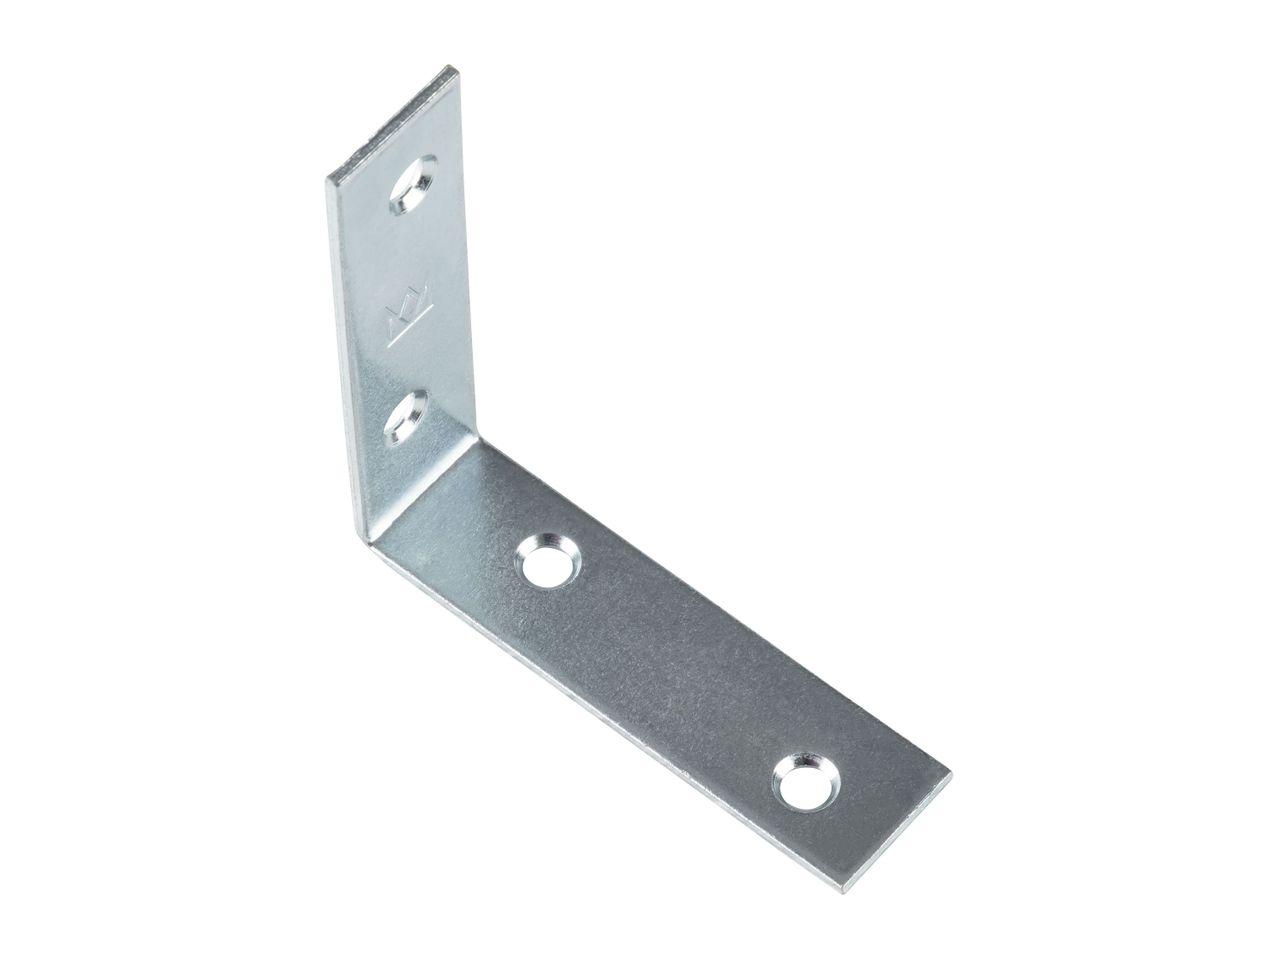 Go to full screen view: PARKSIDE Angle Brackets / Mending Plates / T-Brackets / Corner Braces - Image 7